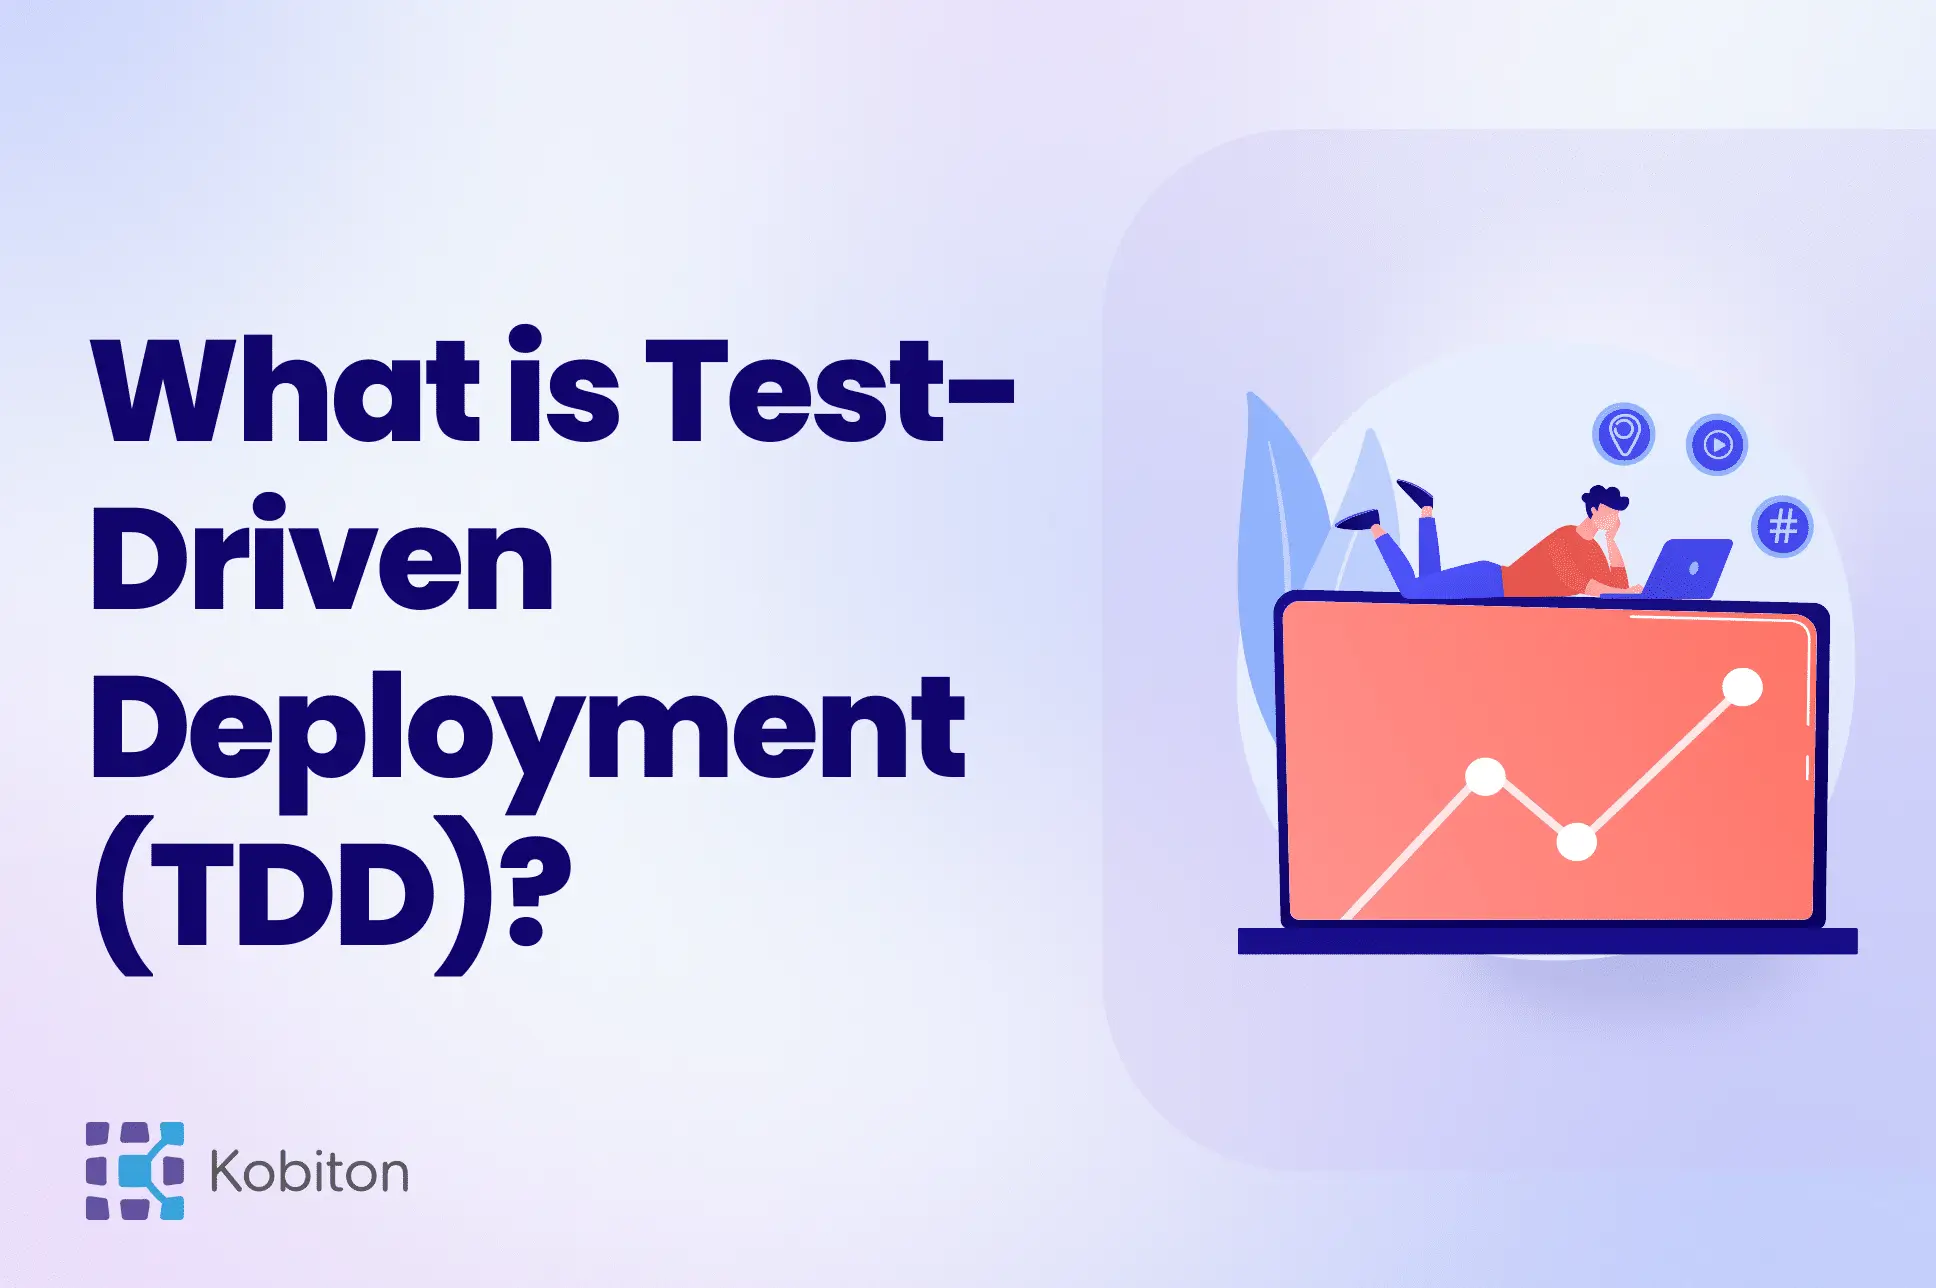 What is test driven deployment (TDD)?